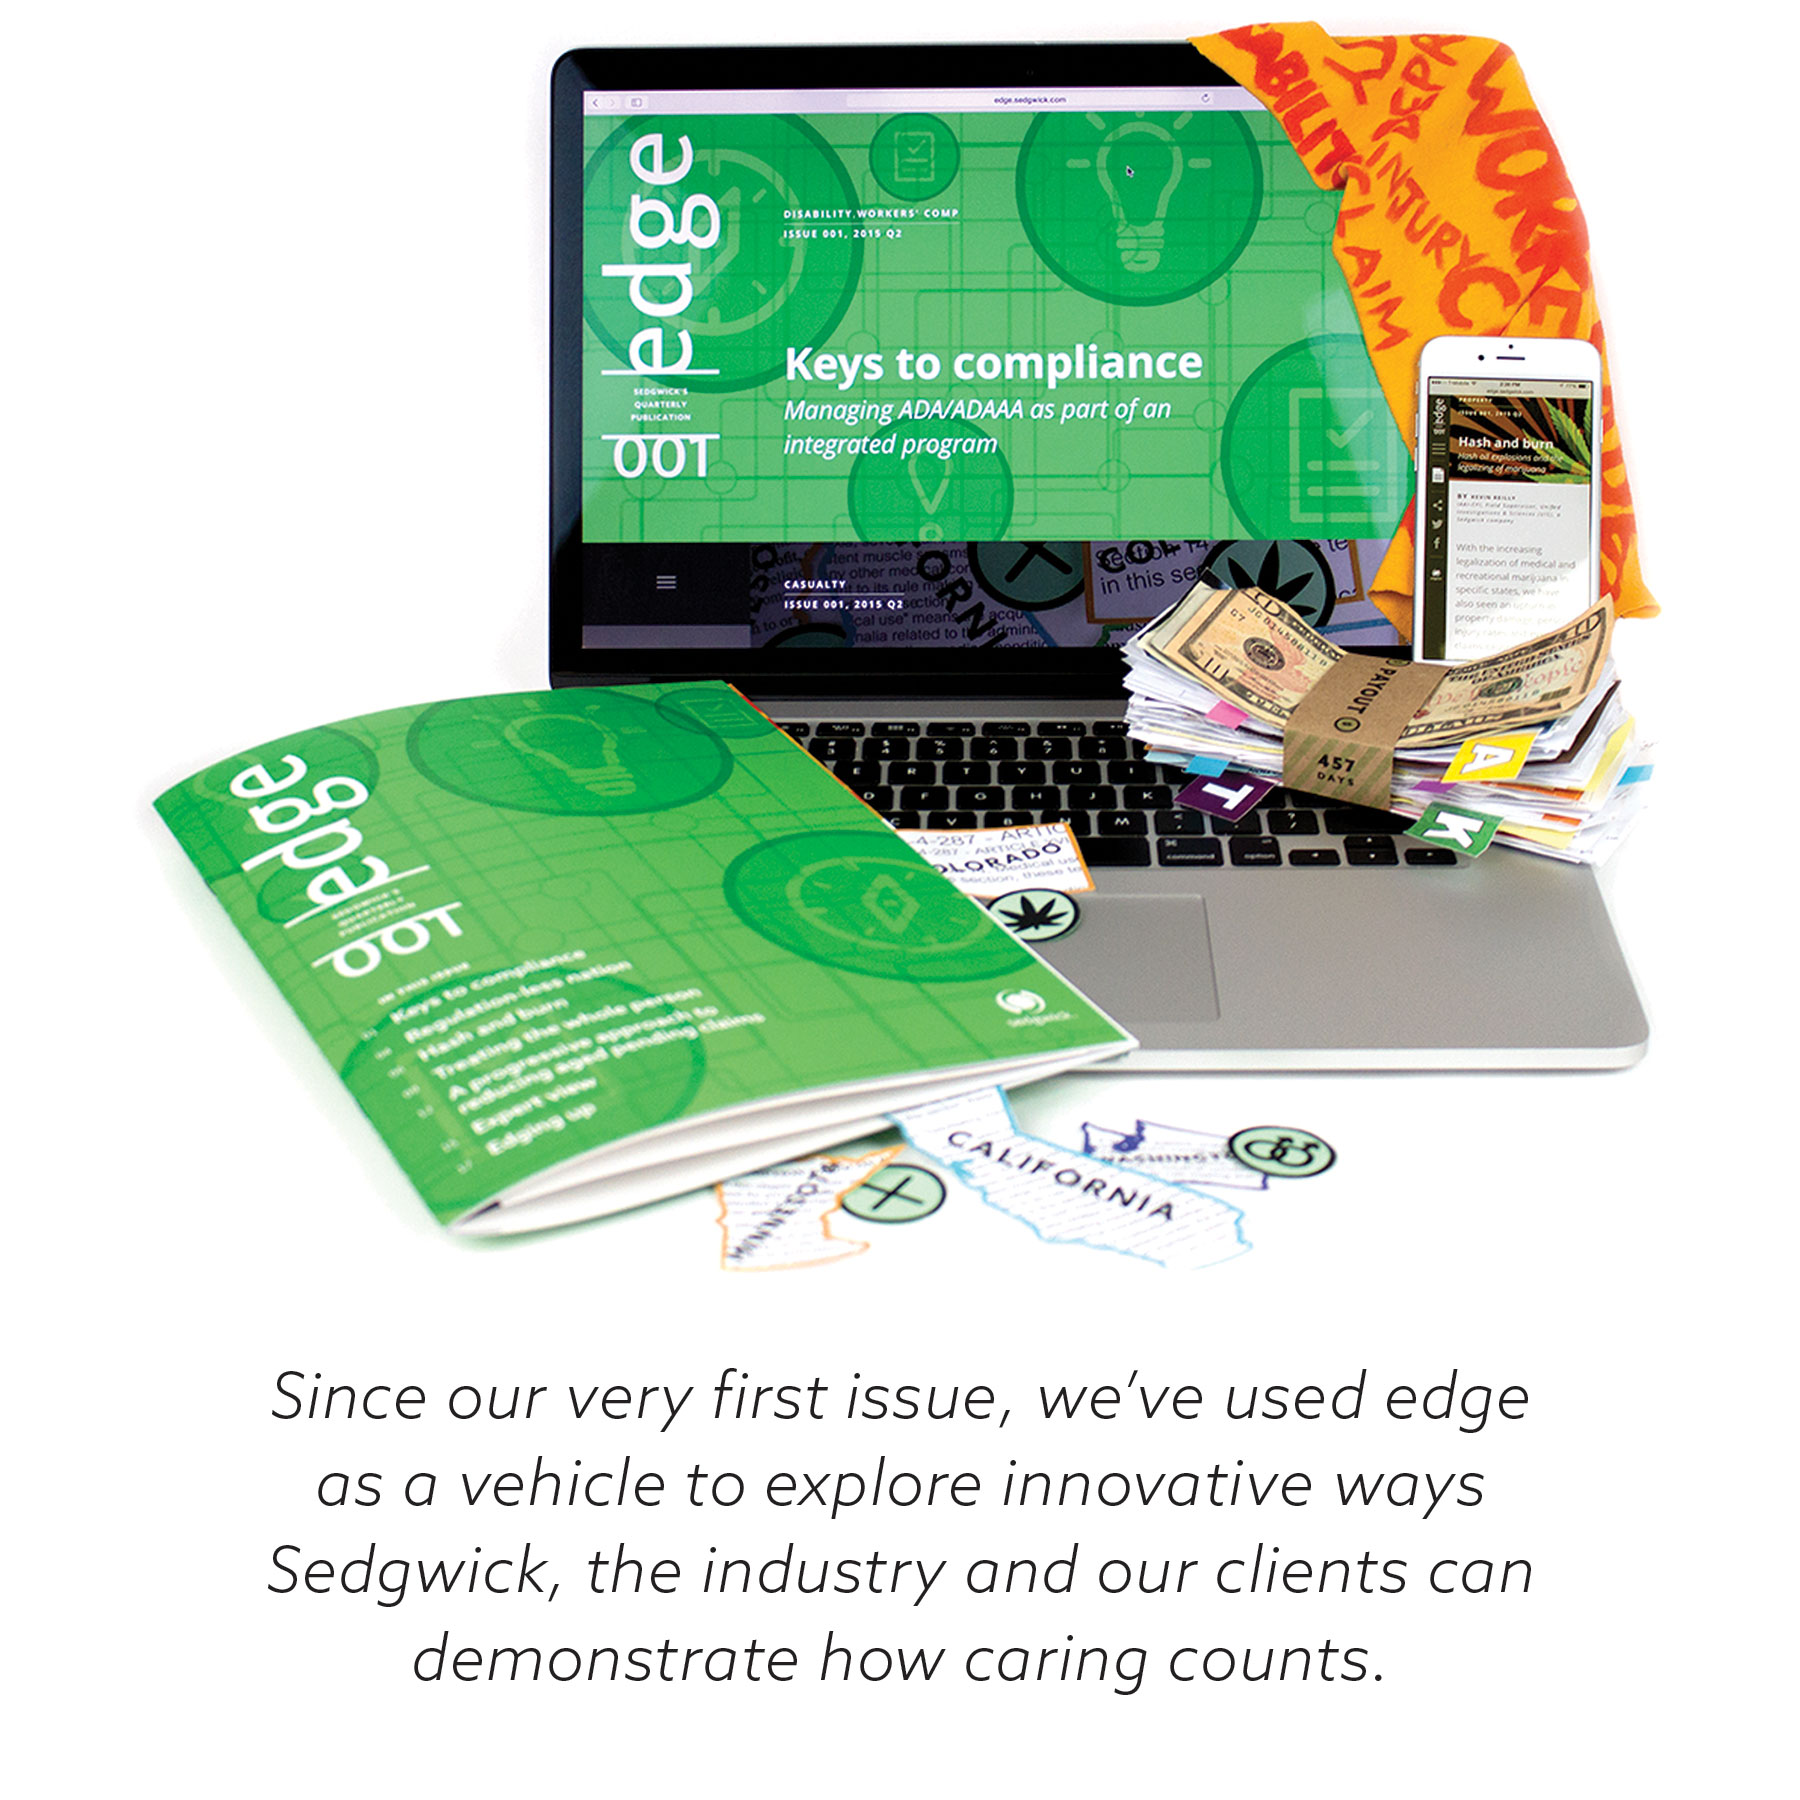 Since our very first issue, we’ve used edge as a vehicle to explore innovative ways Sedgwick, the industry and our clients can demonstrate how caring counts.